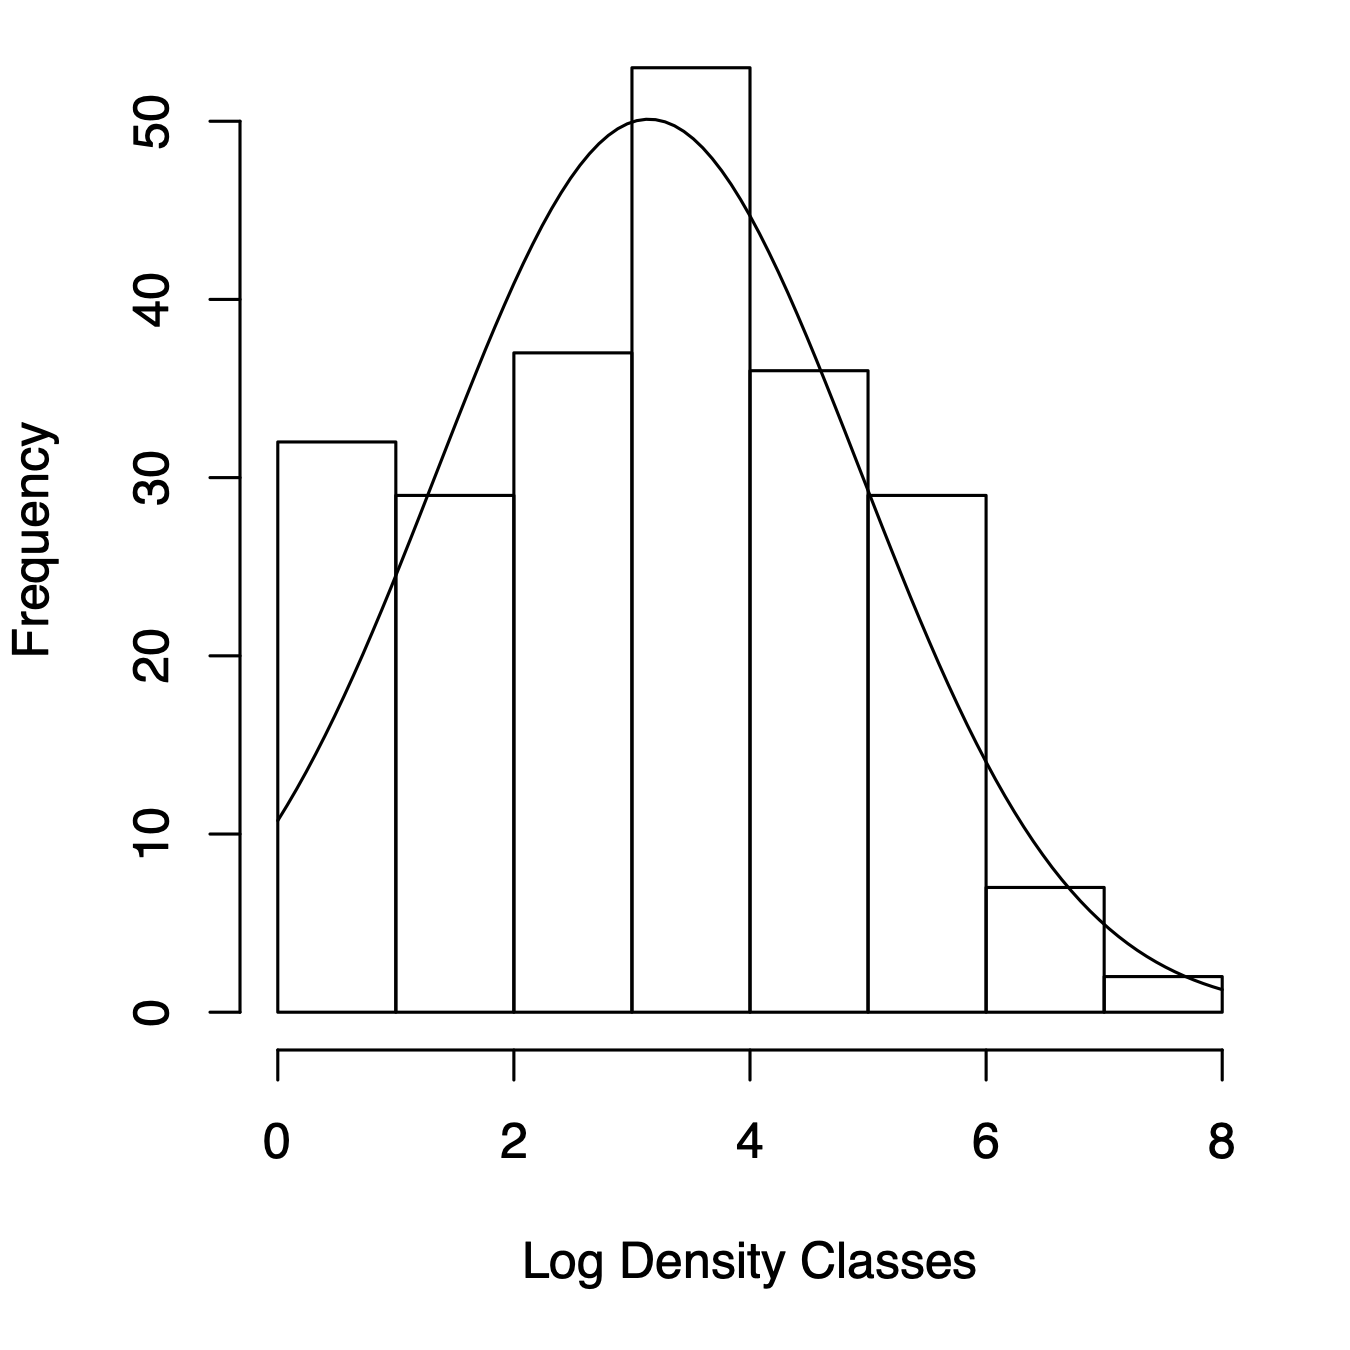 Three related types of distributions of tree species densities from Barro Colorado Island. Left, histogram of raw data; center, the species--abundance distribution, which is a histogram of log-transformed abundances, accompanied here by the normal probability density function; right, the rank--abundance distribution, as typically presented with the log-transformed data, with the complement of the cumulative probability density function (1-pdf). Normal distributions were applied using the mean and standard deviation from the log-transformed data, times the total number of species.